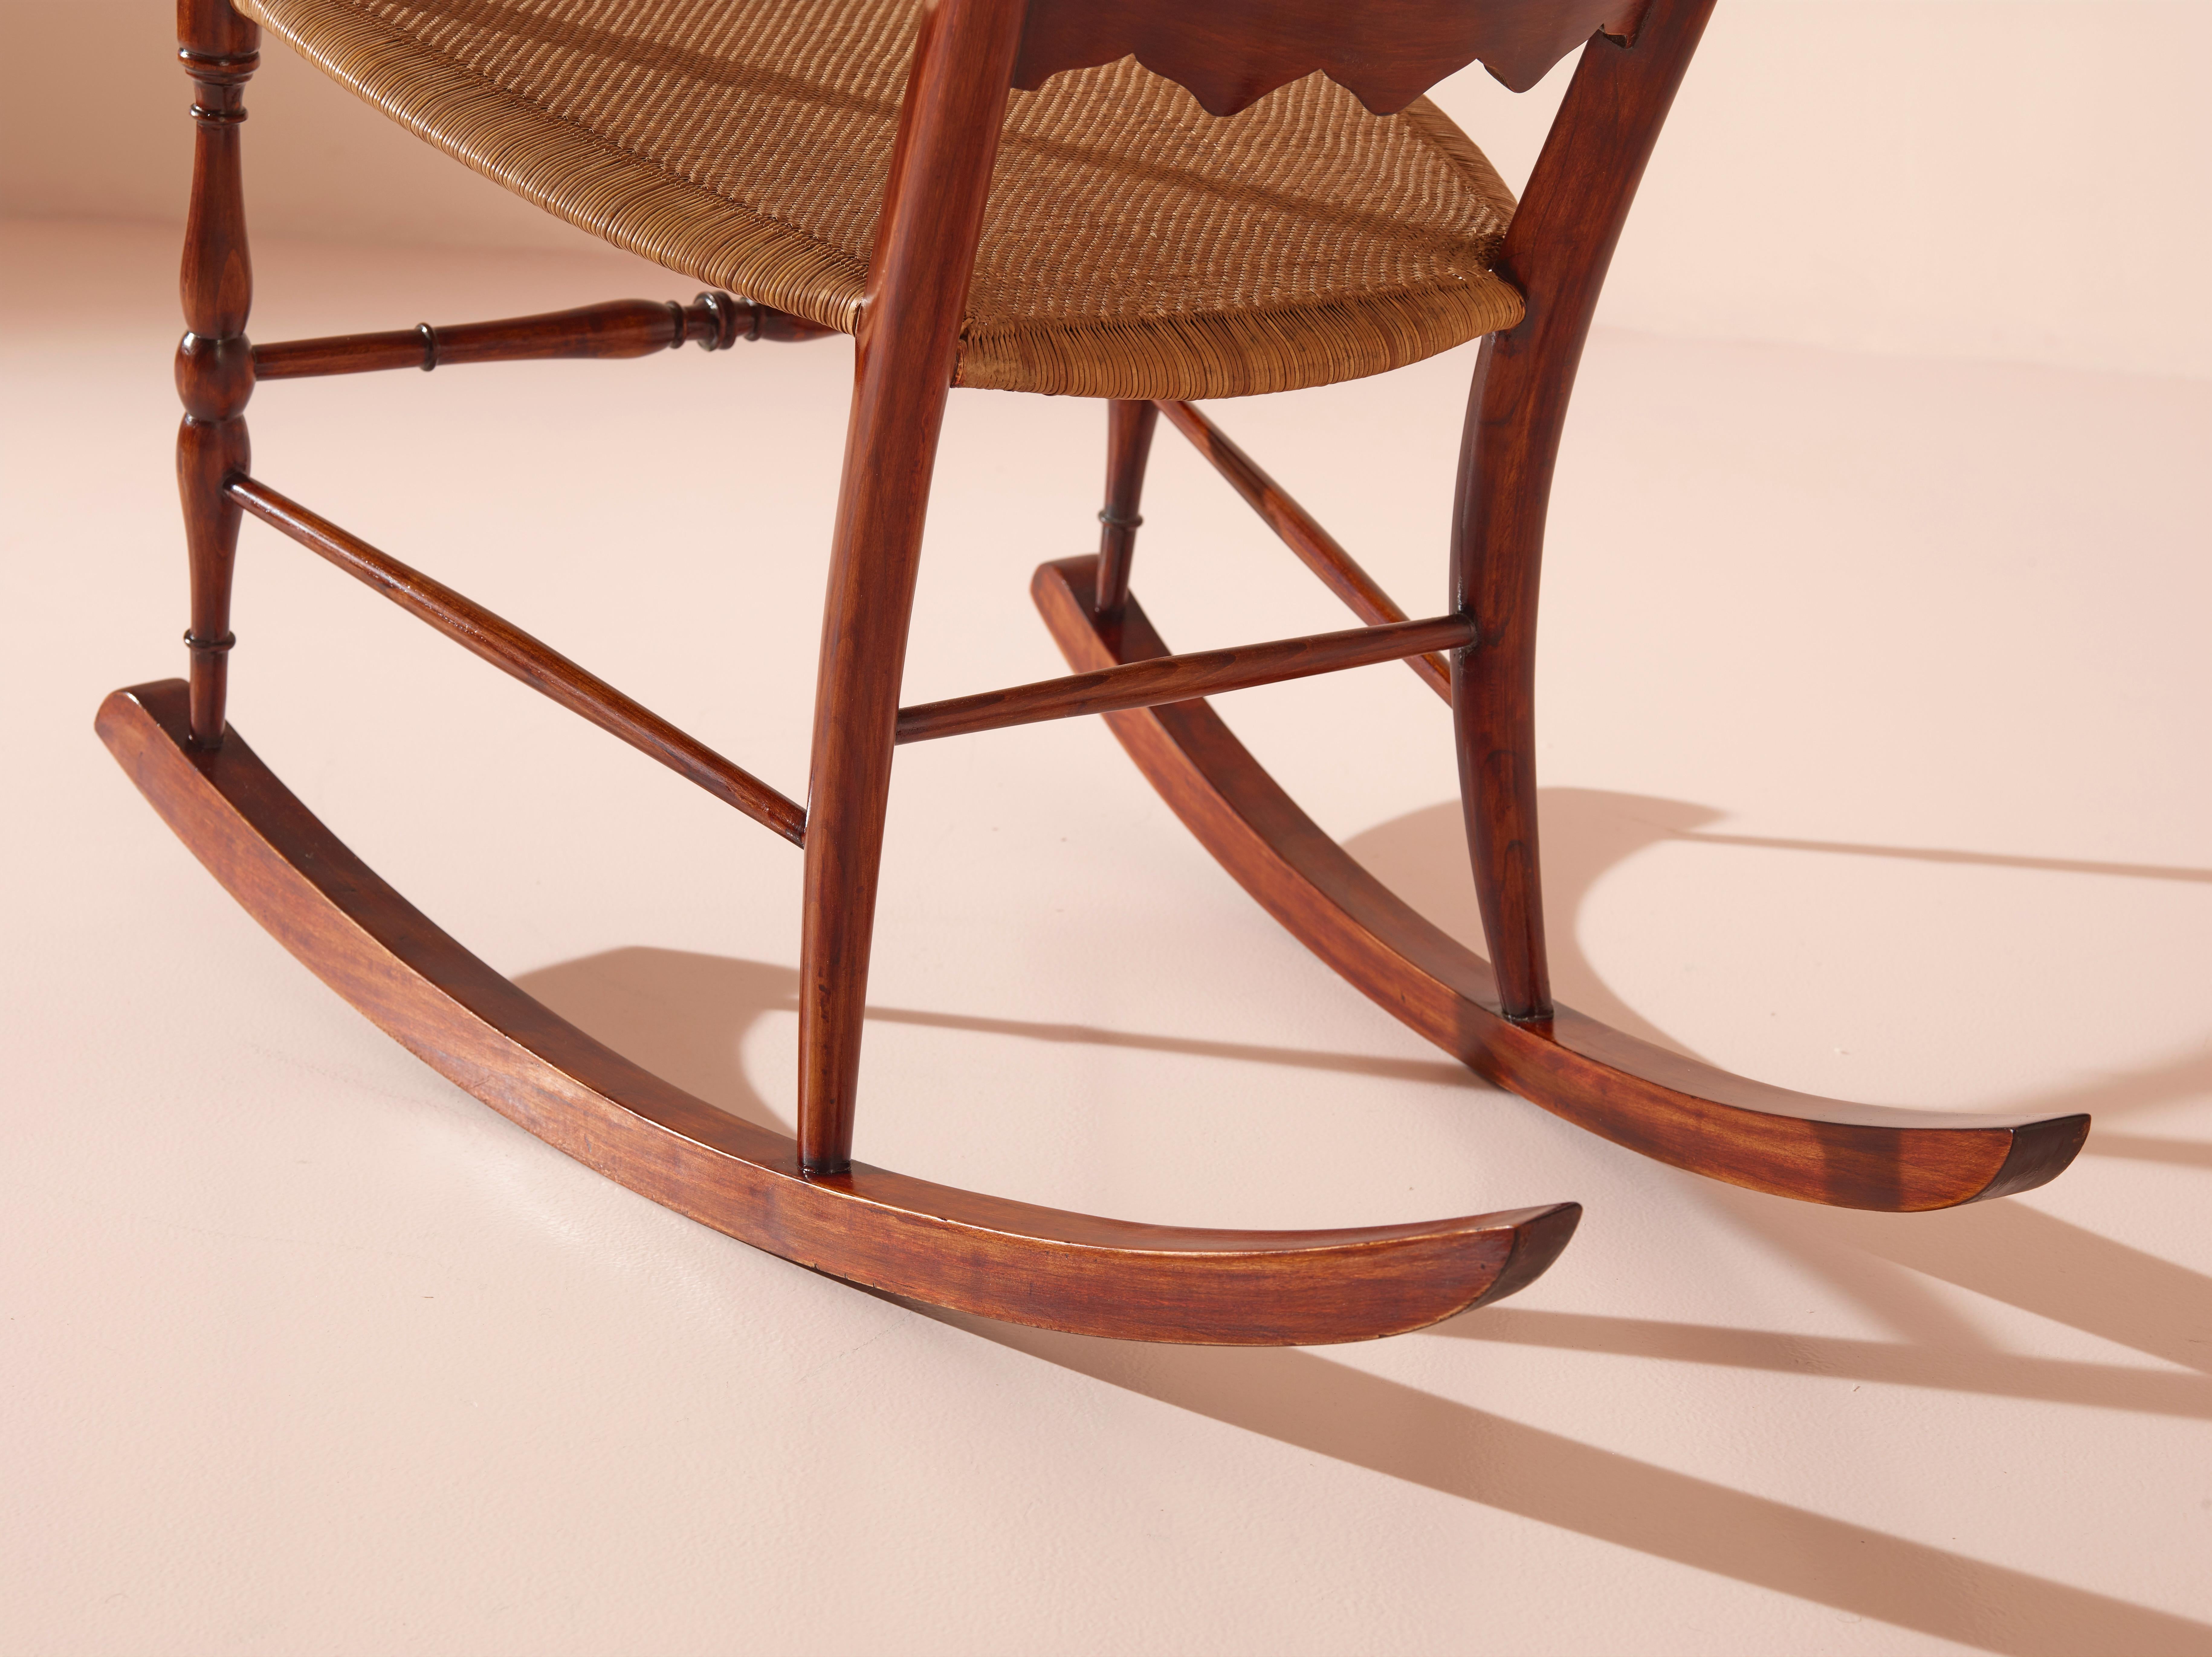 Colombo Sanguineti rocking chair made of beech and woven straw, Chiavari, 1940s For Sale 2